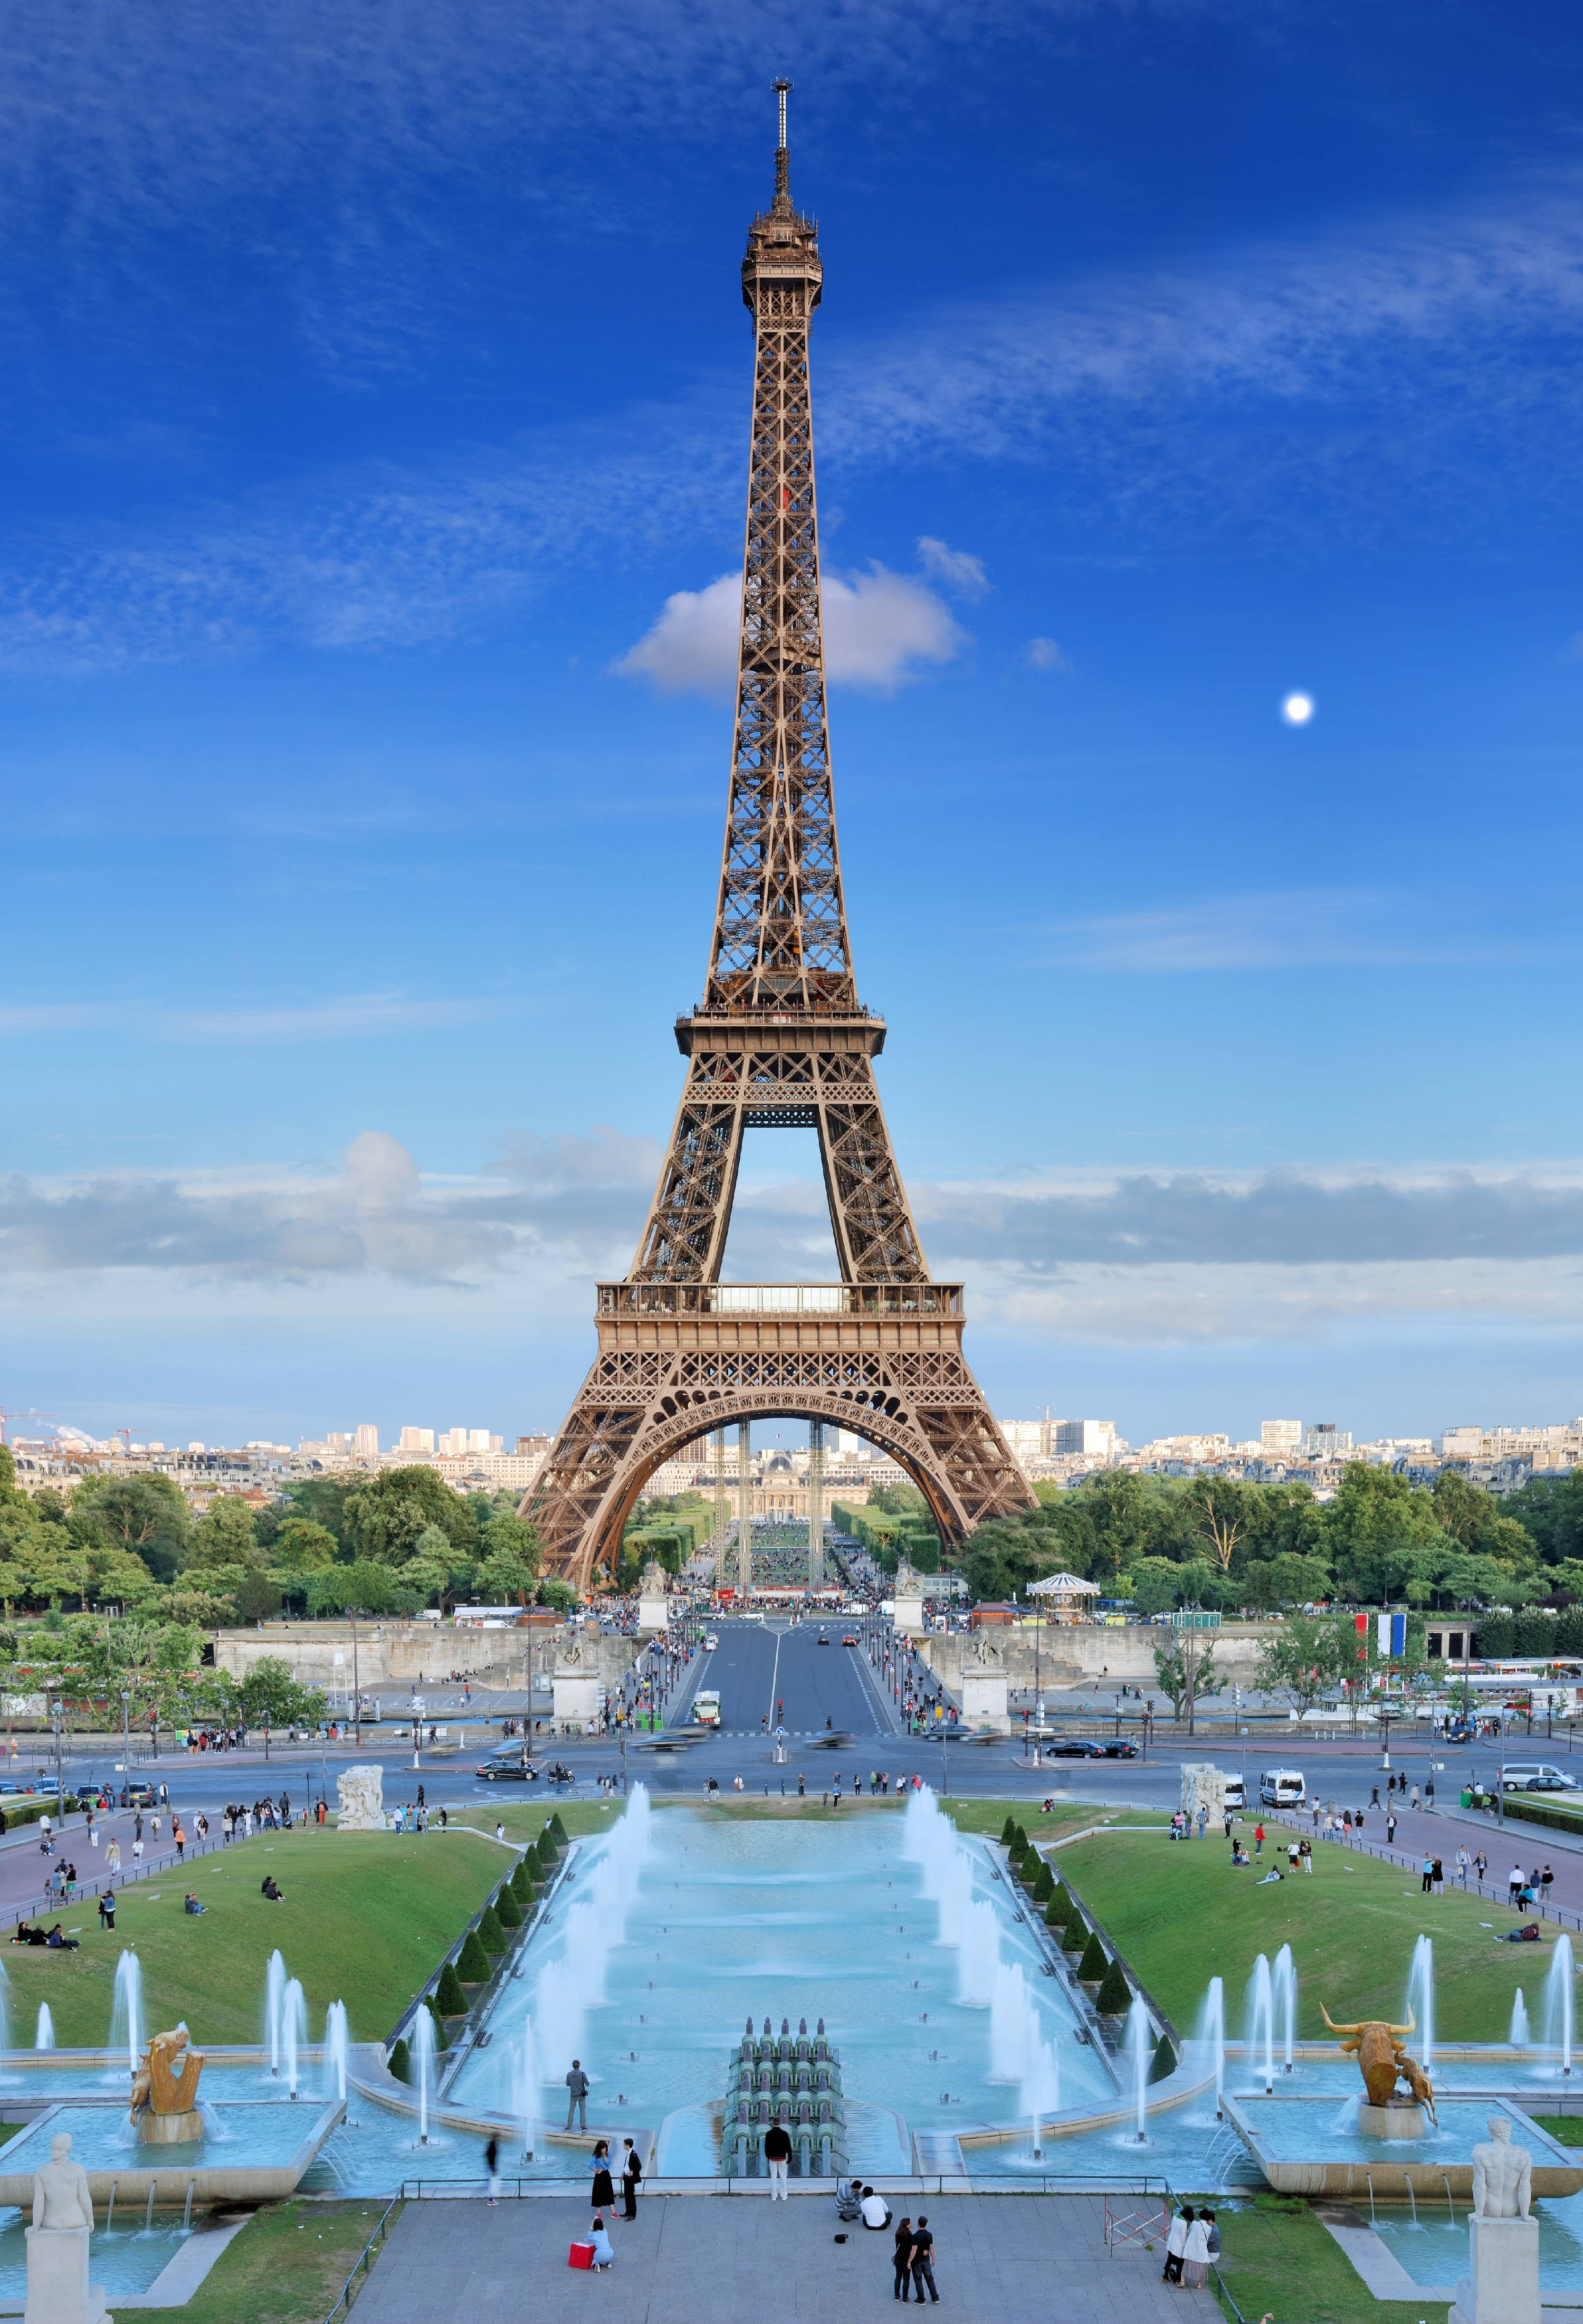 Jigsaw Puzzle 1000 Pieces Gold Edition "Eiffel Tower" by Wuundentoy 